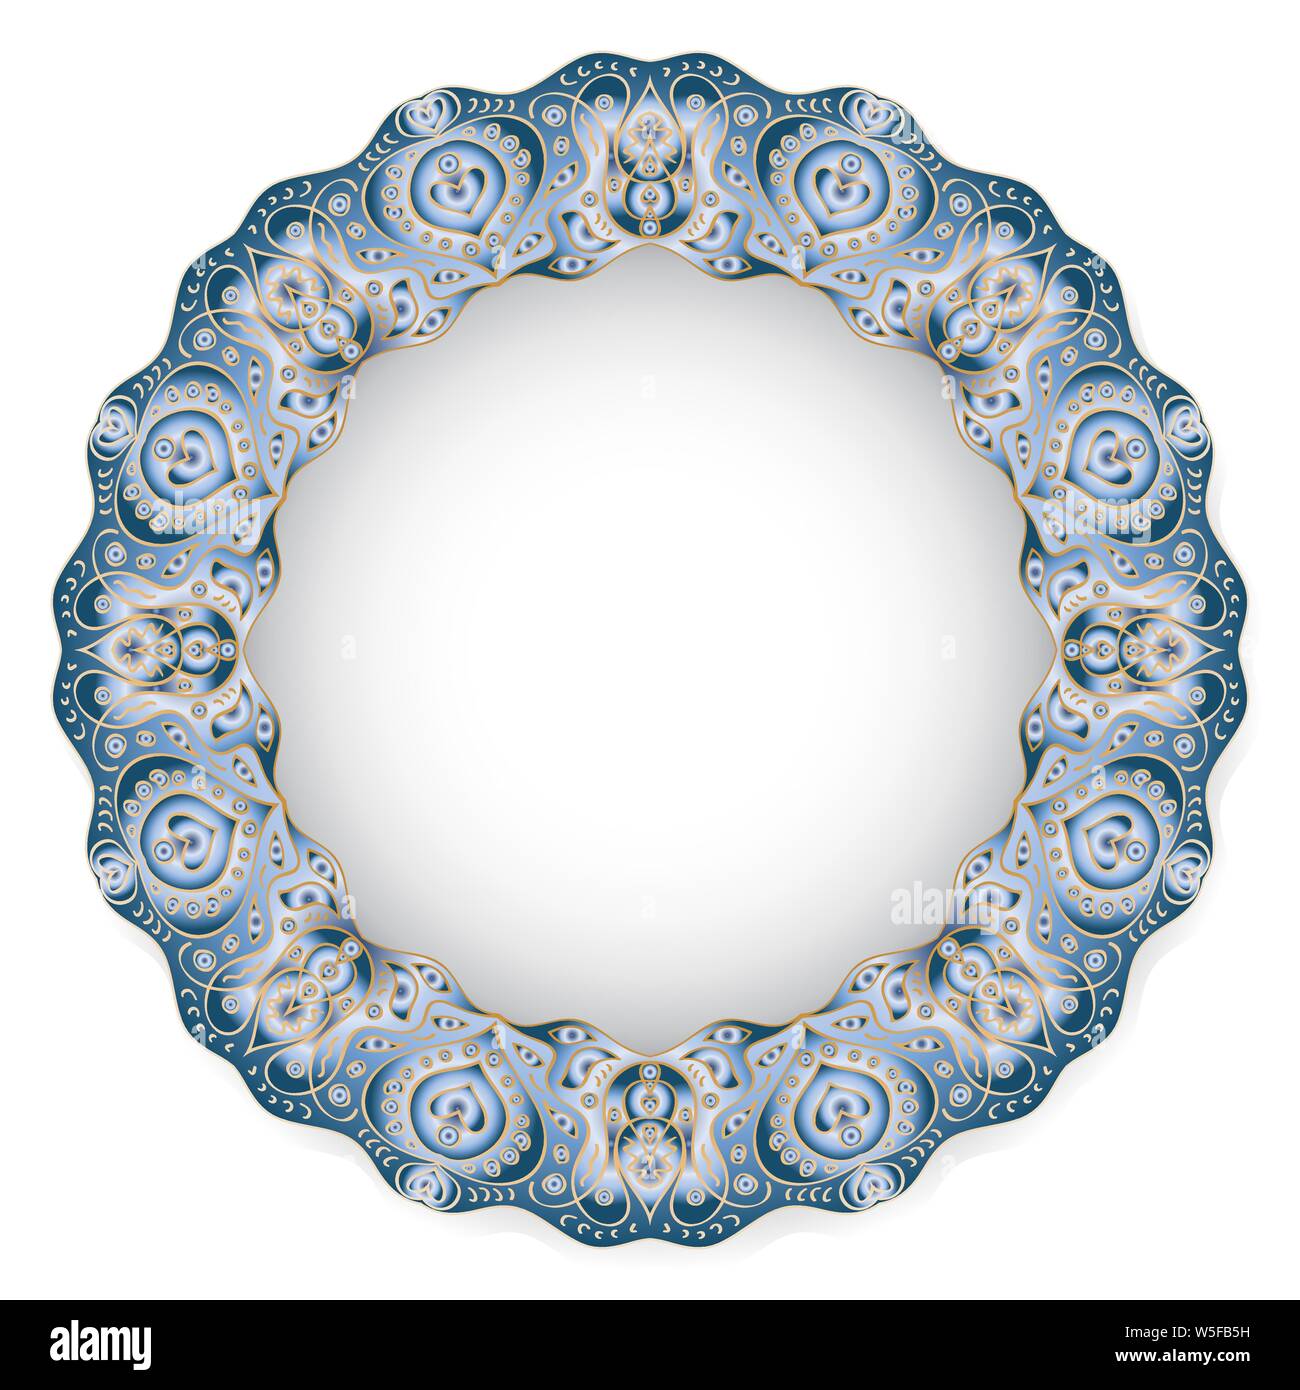 Circular blue flower pattern with empty space in the center. White porcelain plate with a stylized pattern in ethnic style. Vector illustration. Stock Vector